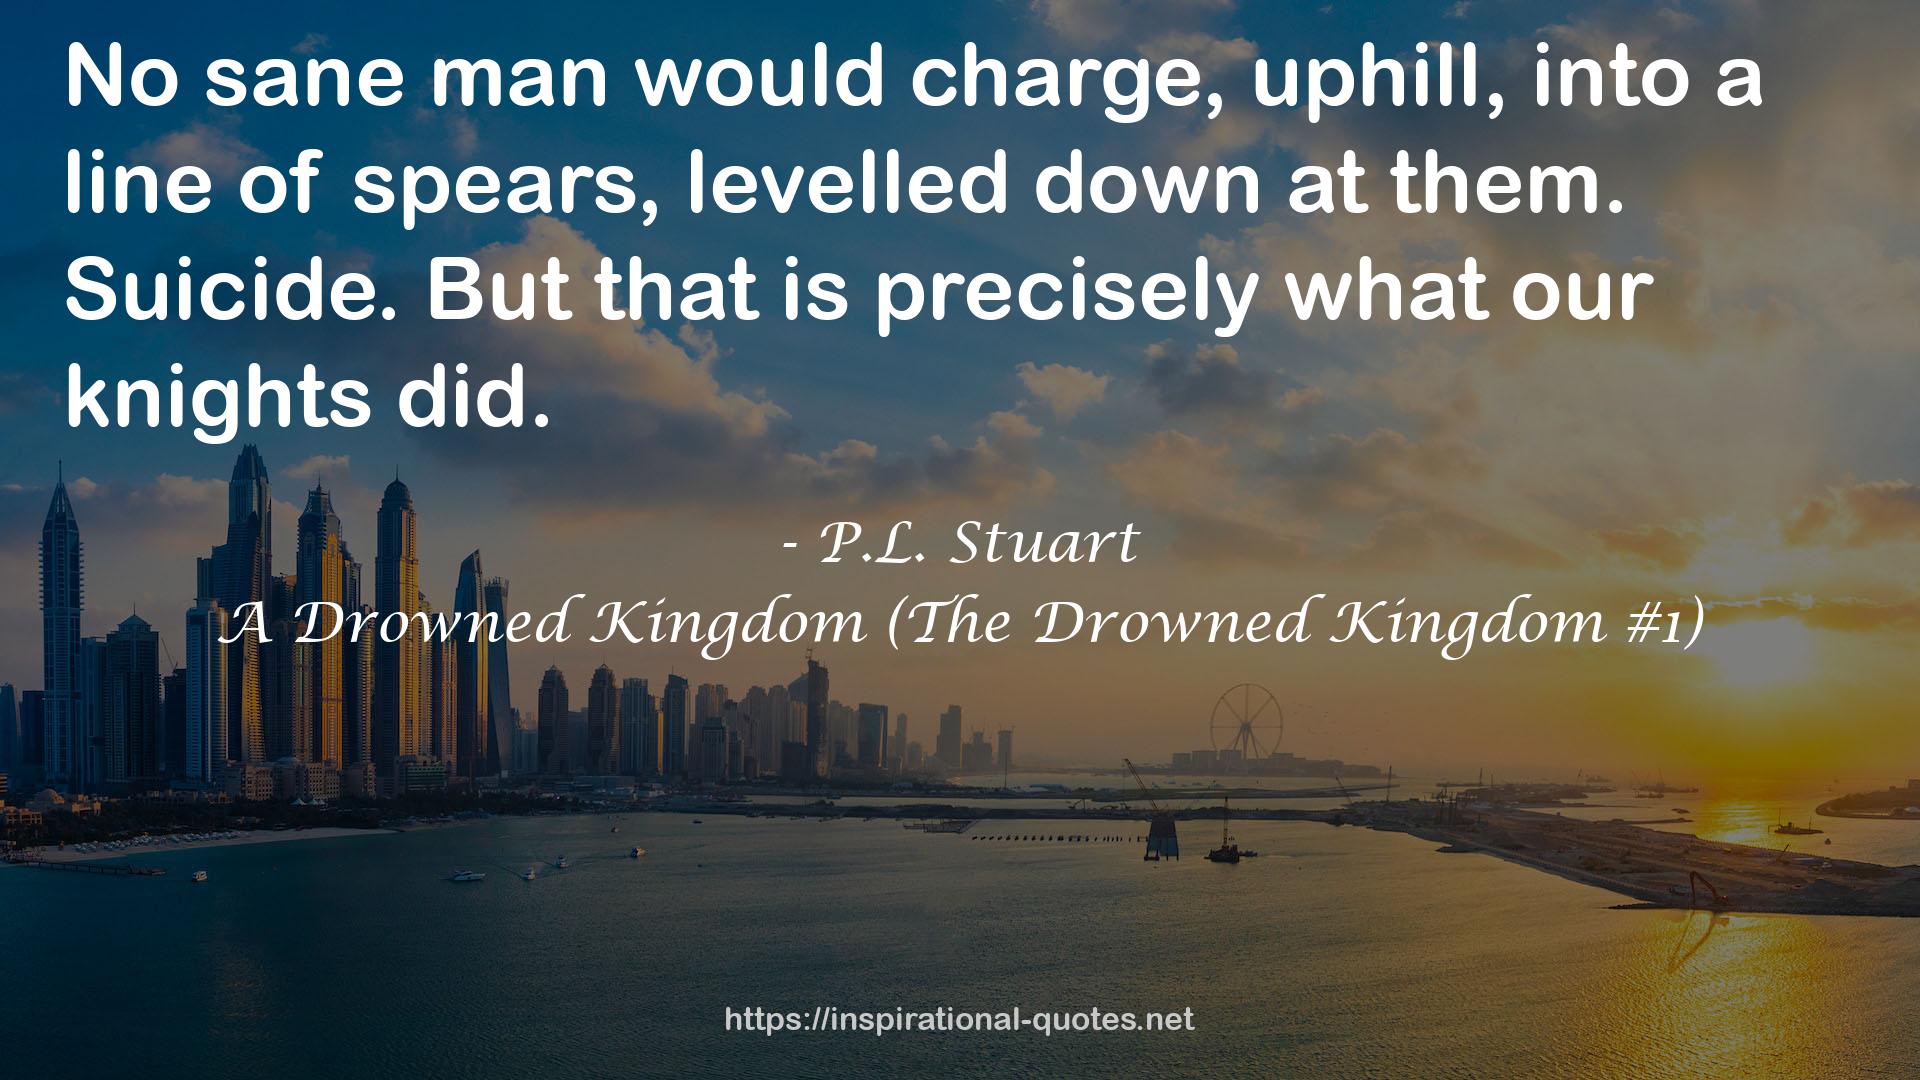 A Drowned Kingdom (The Drowned Kingdom #1) QUOTES